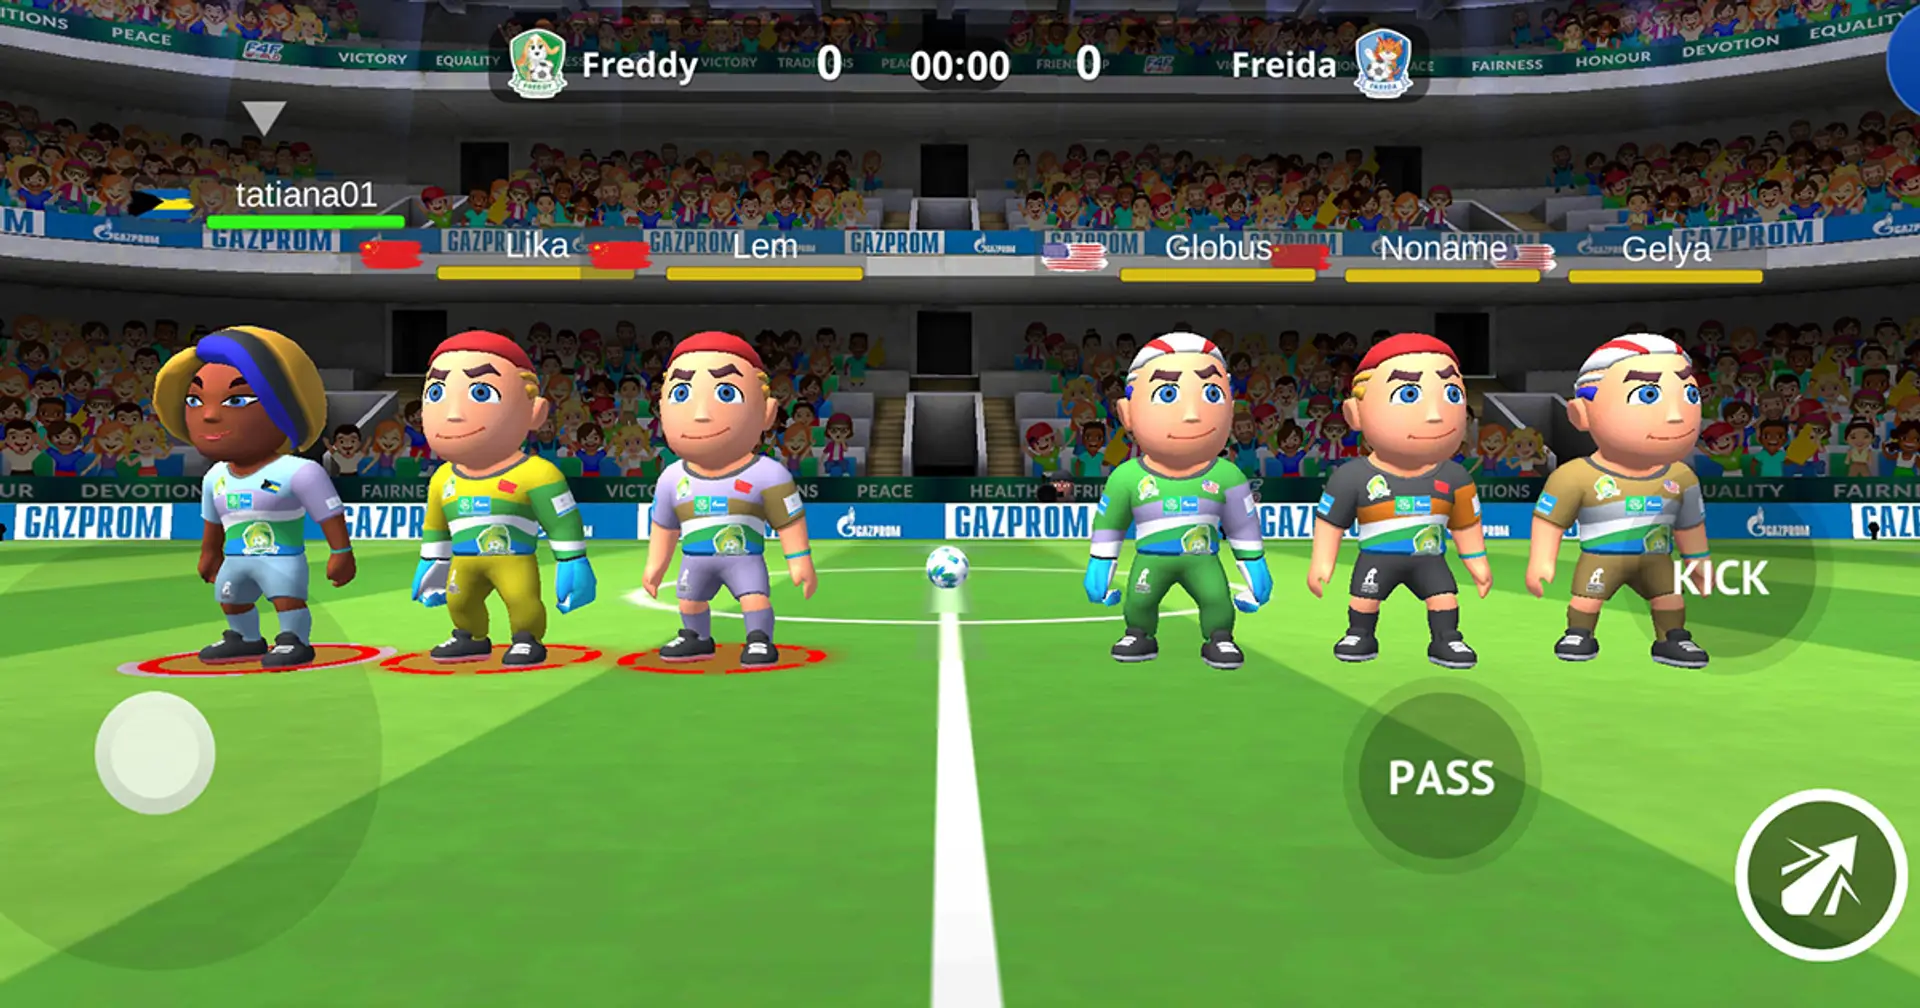 Football for Friendship World video game will be released on World Football Day